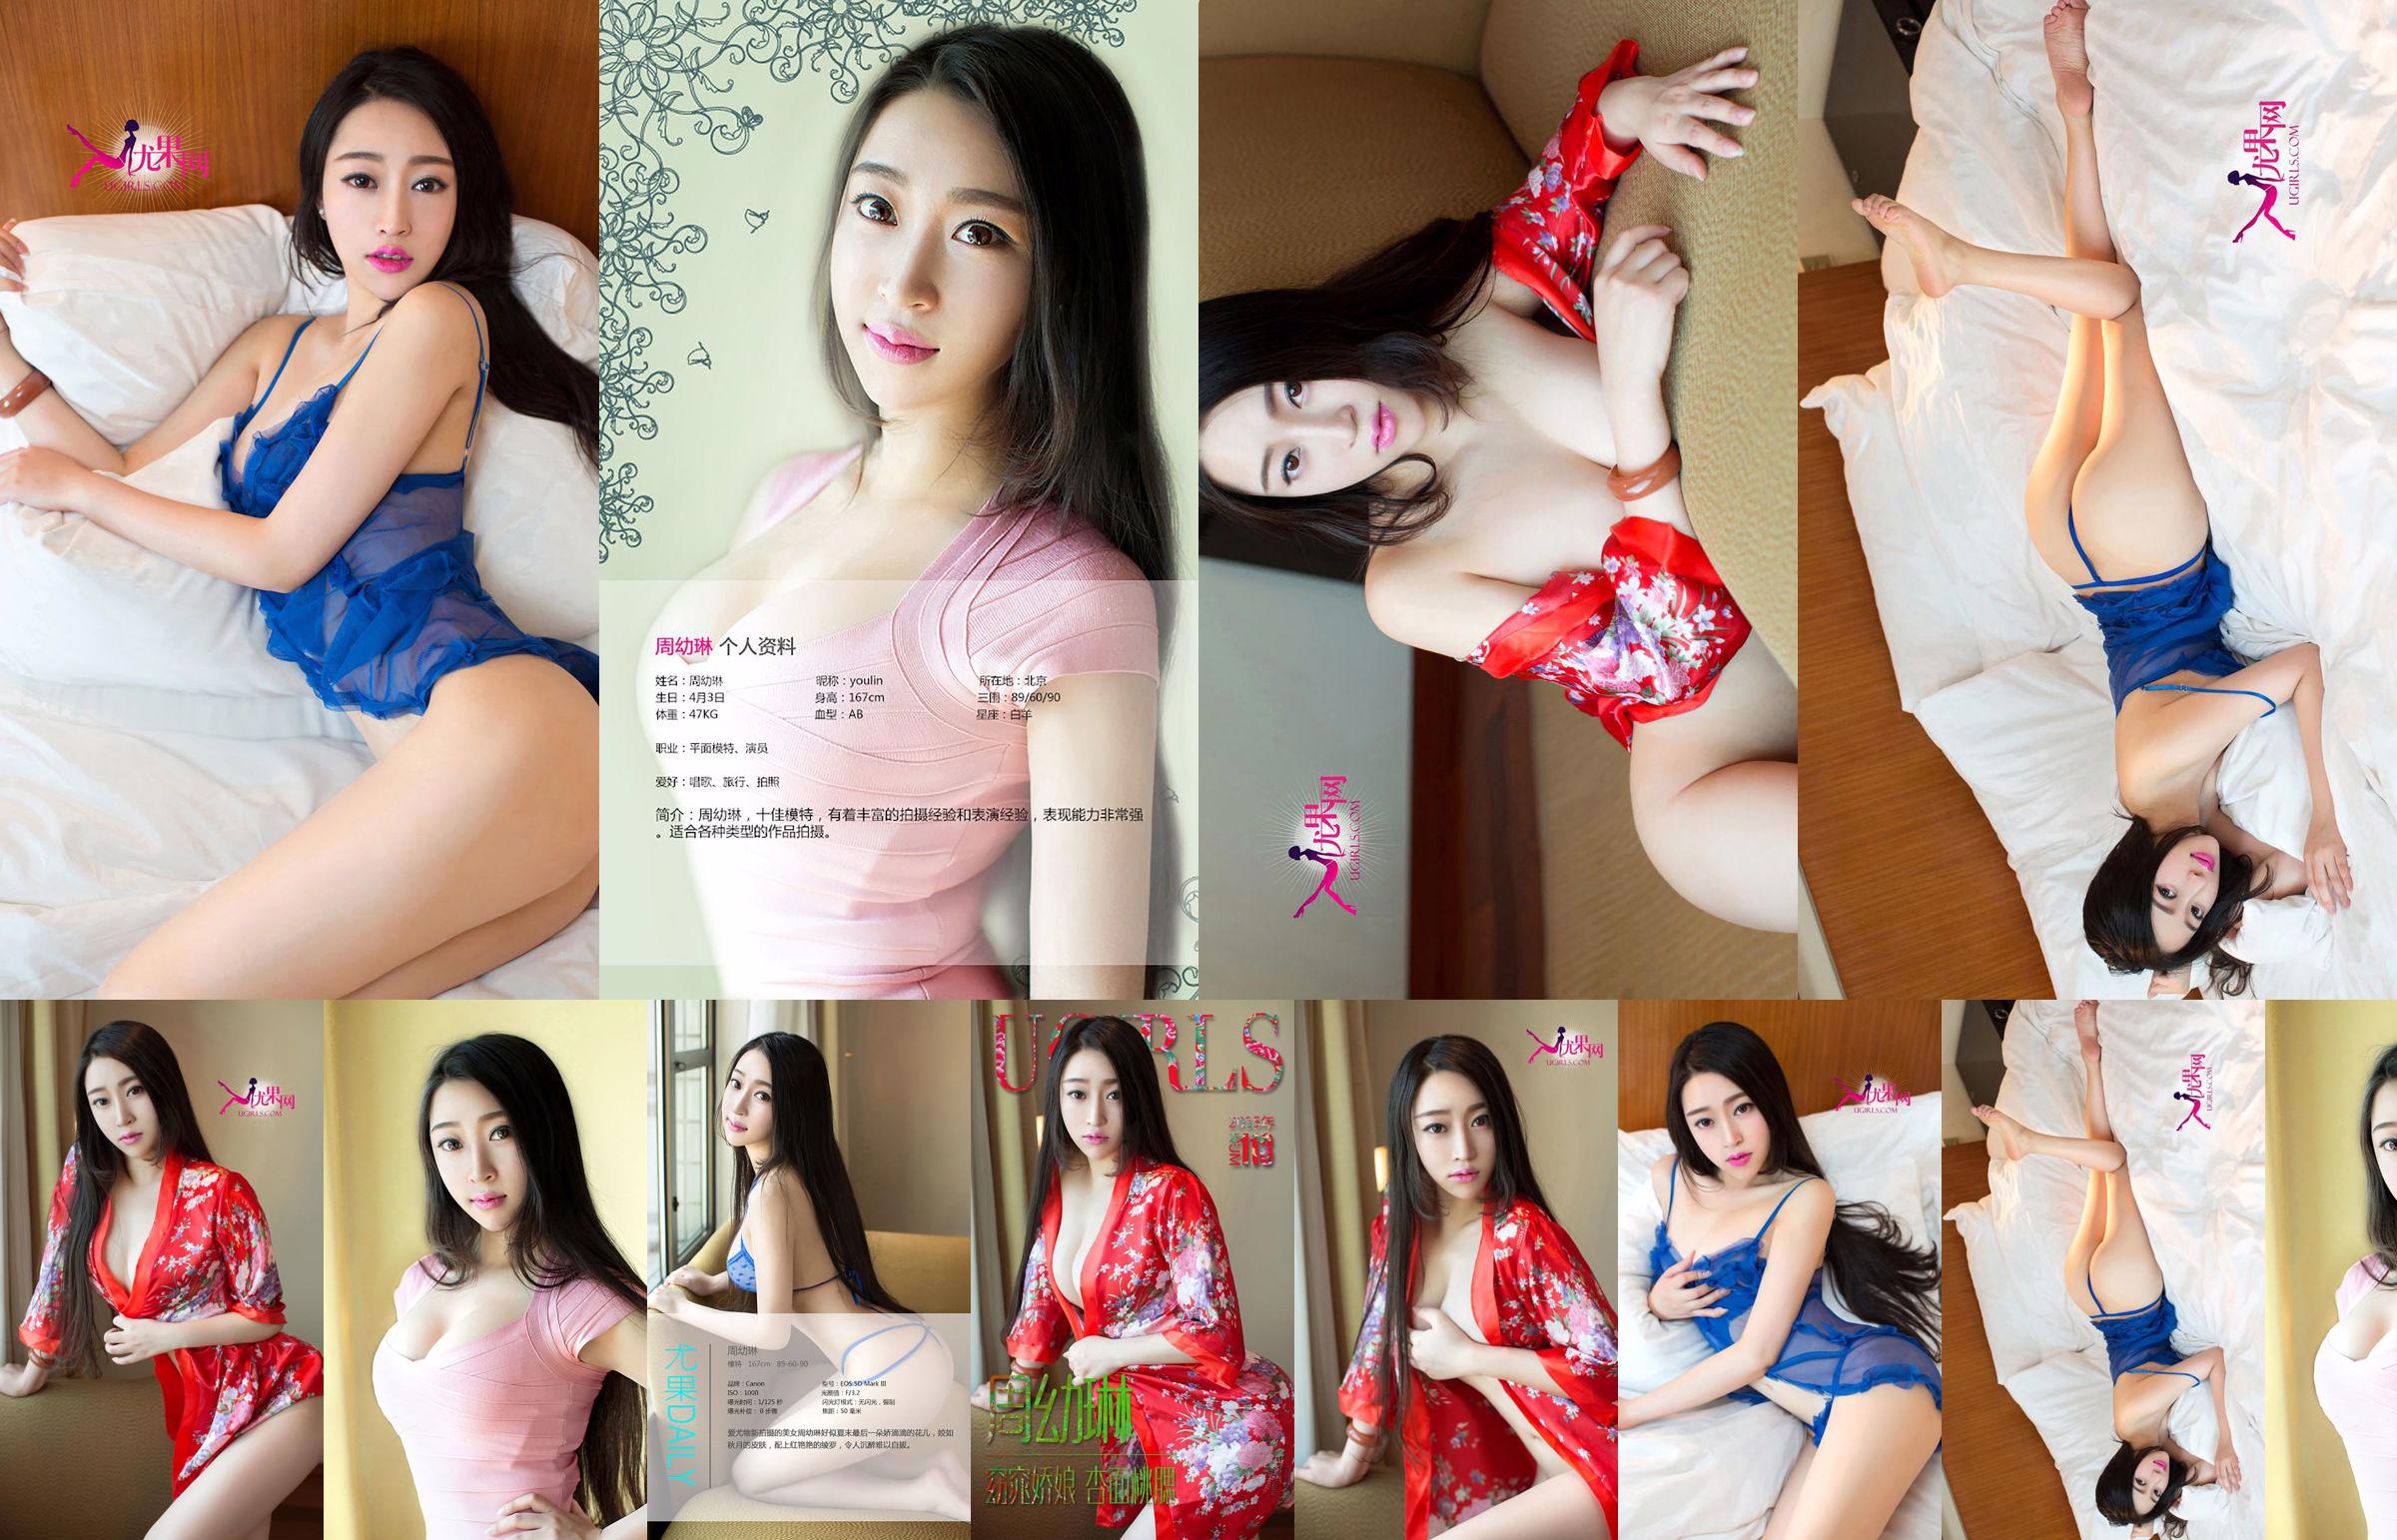 Zhou Youlin "A Beautiful Girl with Apricot Face and Peach Cheeks" [Love Youwu Ugirls] No.113 No.776c45 หน้า 1